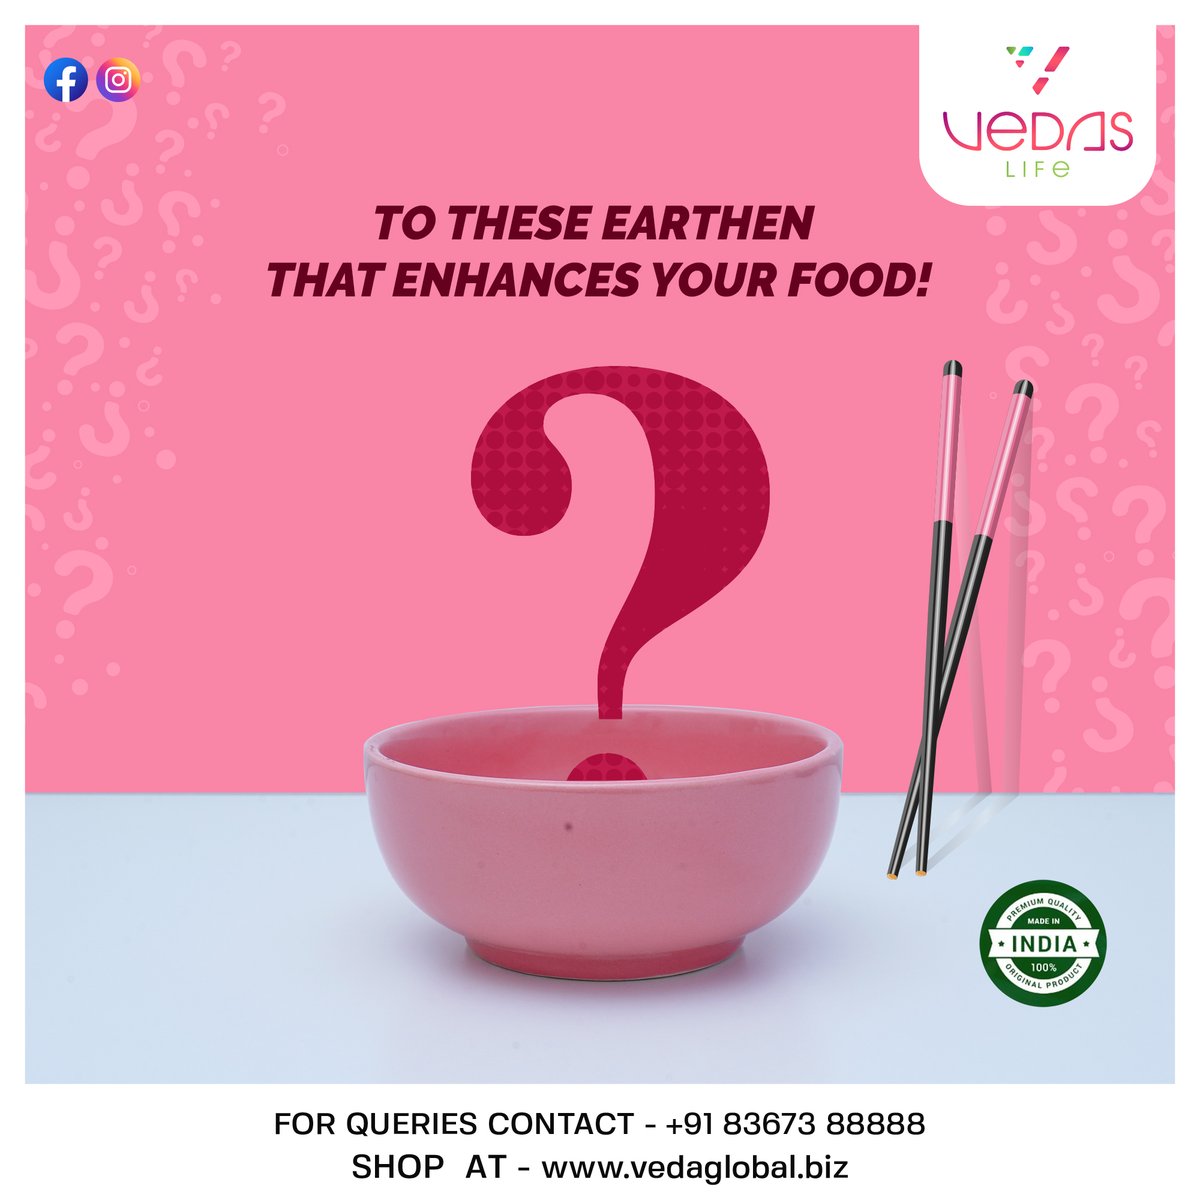 Get your diet more nutritious & healthy than before!

Here's Vedas Bowl to help you bring every benefit inclusive of right quantity.

Follow us : instagram.com/vedas_life/

#vedaslife #crockeryunitdesign #enhancethefoodclimate #makeinindiaproducts #vedasproducts #productivity